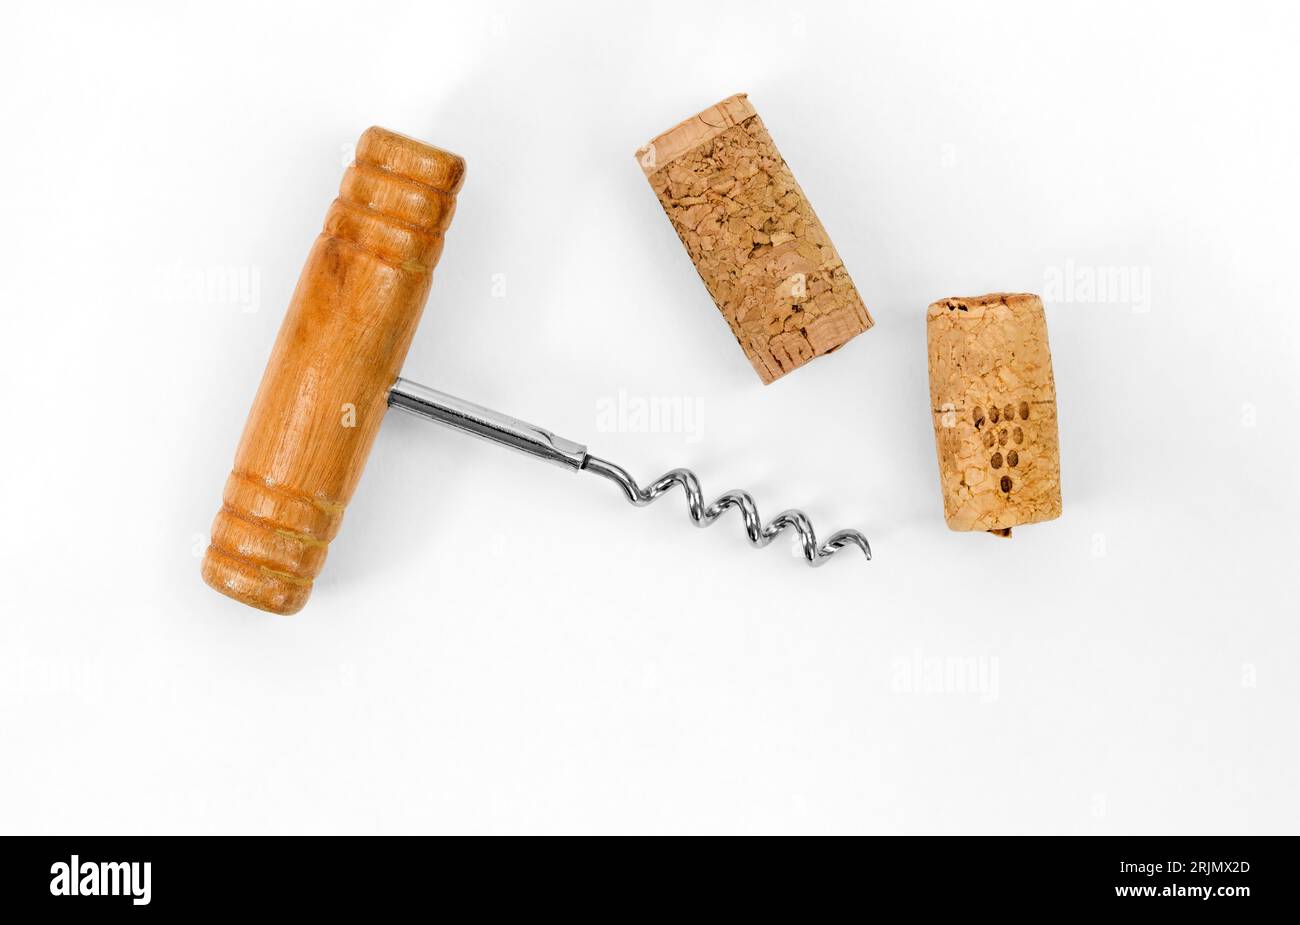 Bottle opener. Corkscrew with wooden handle and wine cork stopper isolated on white background with copy space. Stock Photo